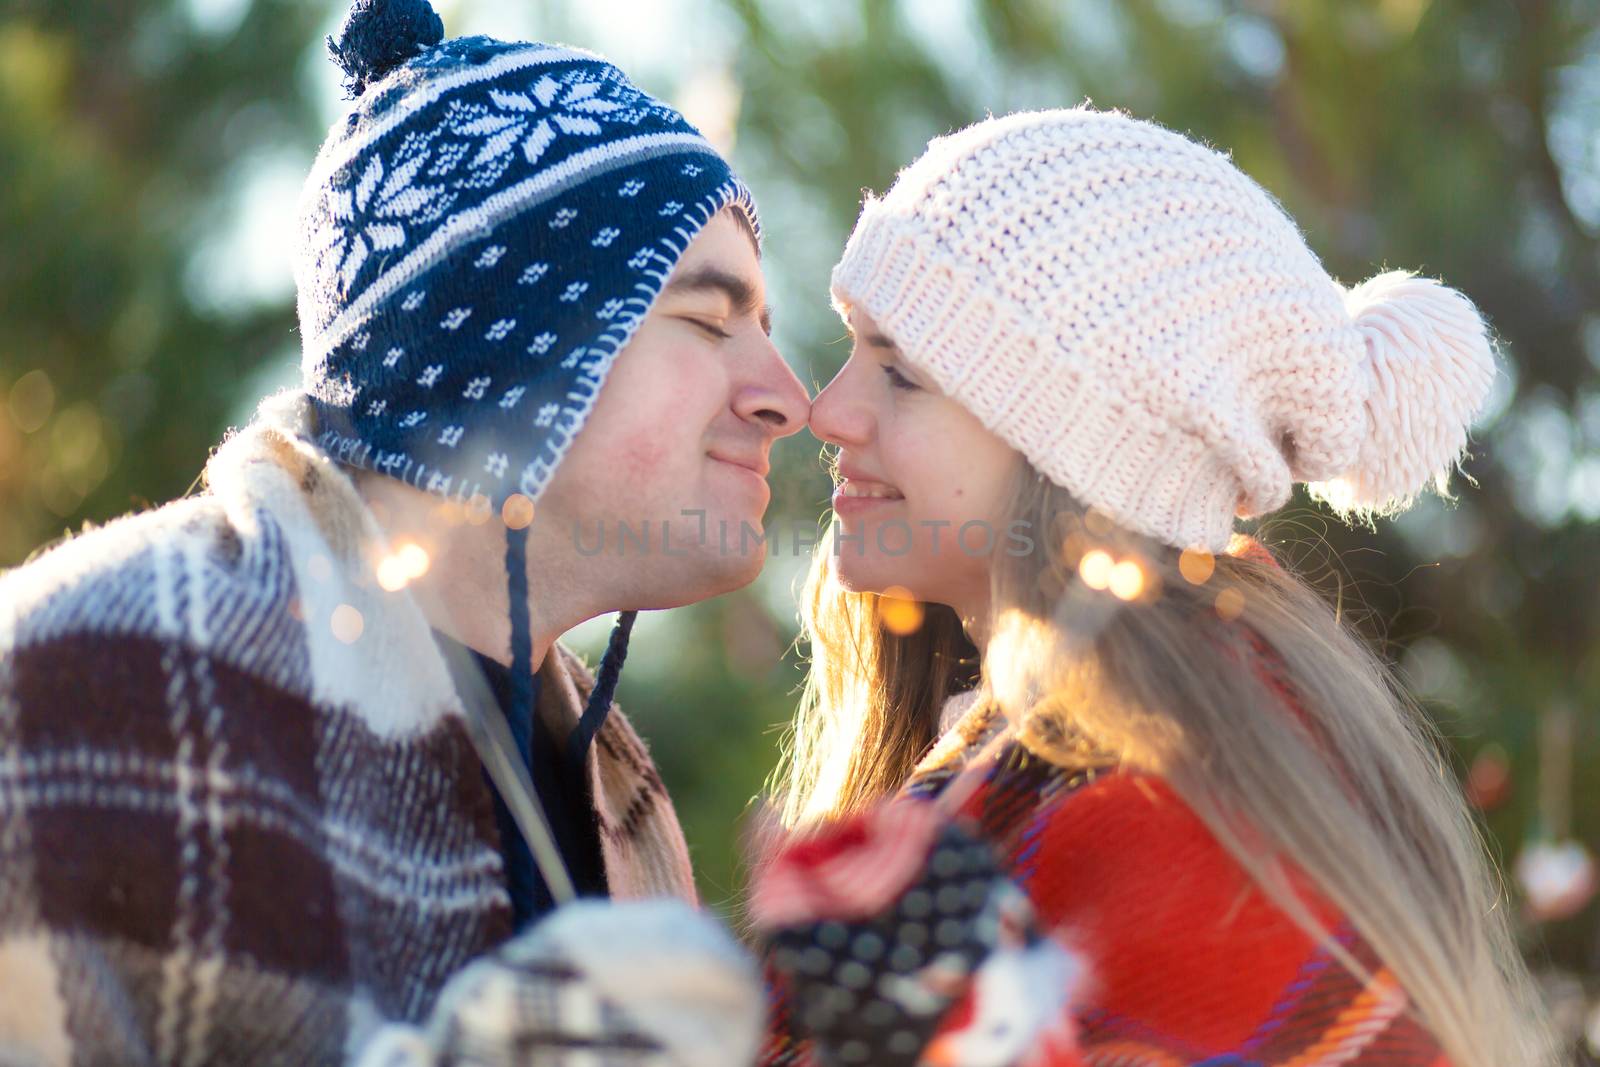 A loving couple in warm plaids kisses holding sparklers in their hands. Meet the winter holidays in a snowy forest.